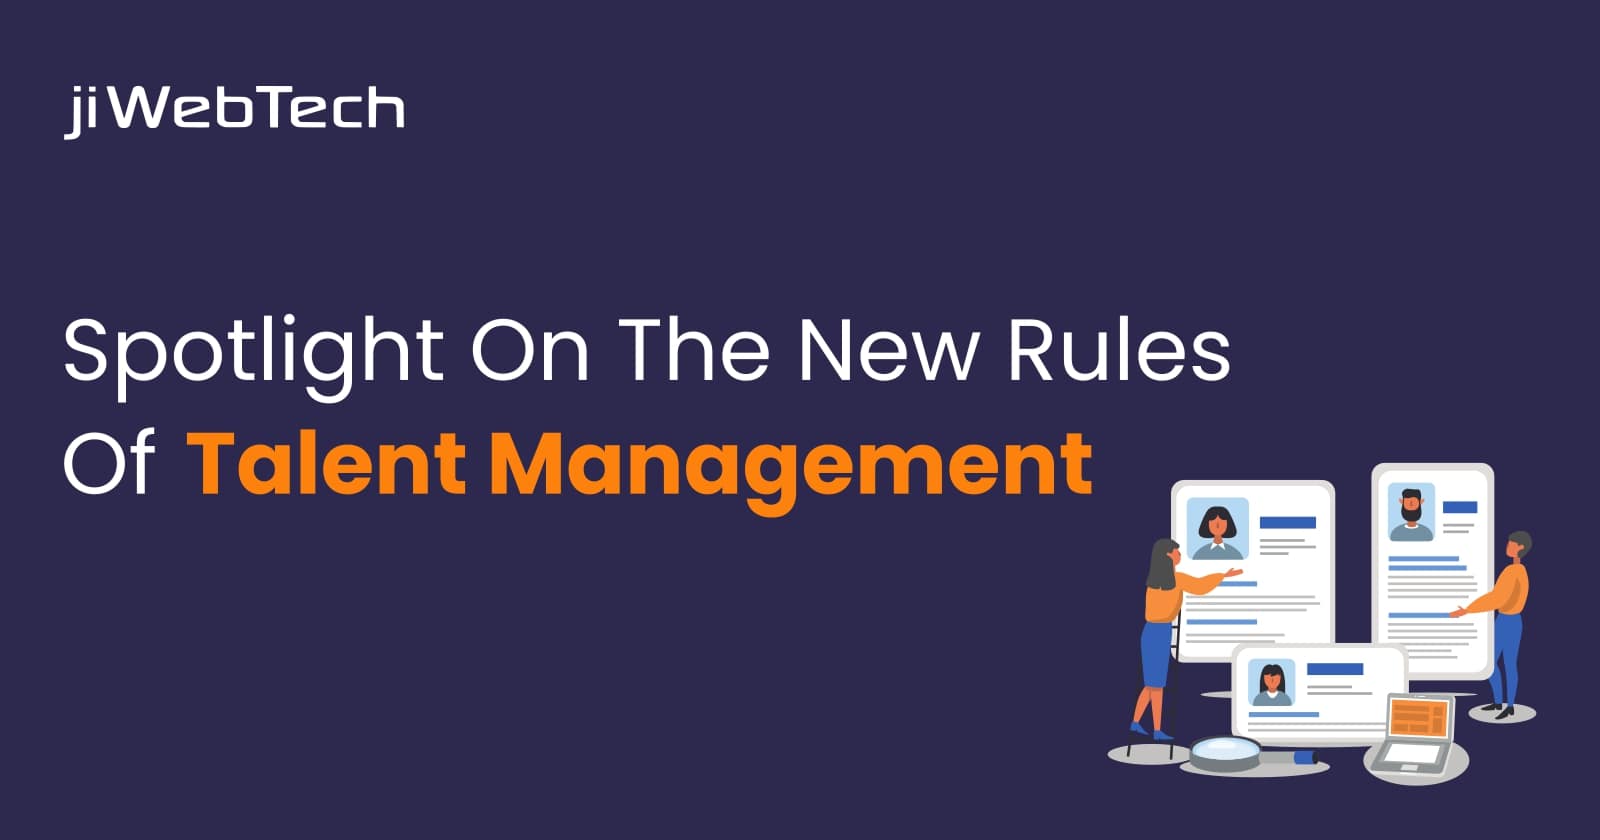 Spotlight On The New Rules Of Talent Management